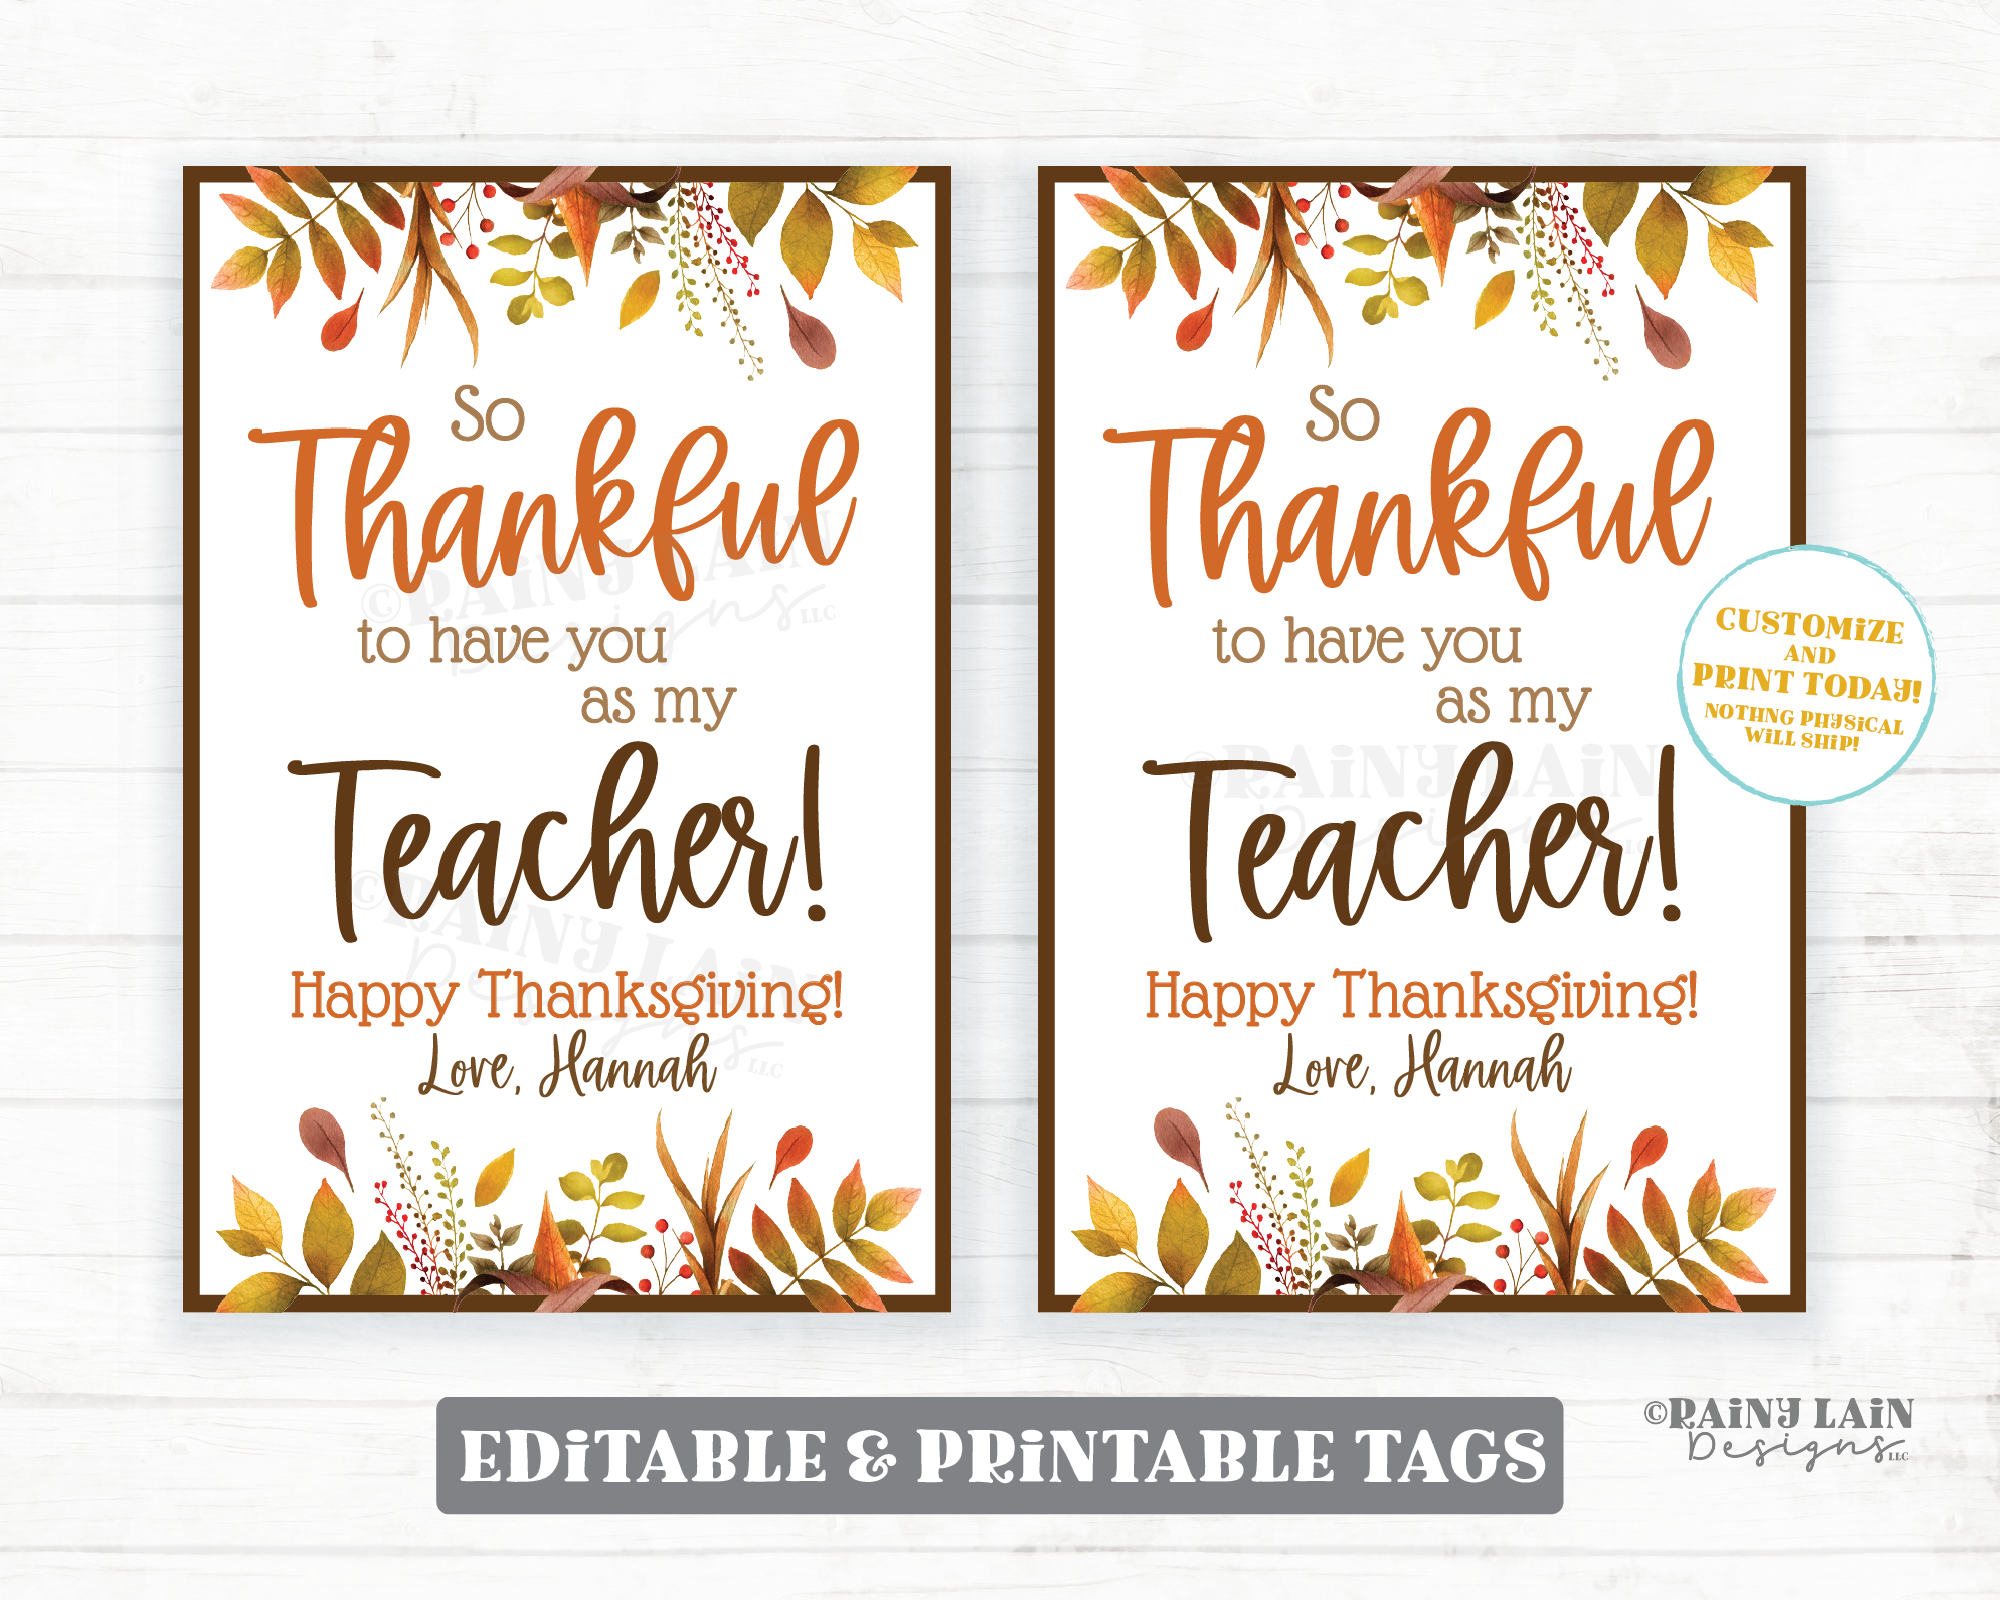 Thankful to have you as my Teacher Friend Co-Worker Employee Teammate Classmate Thanksgiving Gift Tag Appreciation Favor PTO Thank you Treat